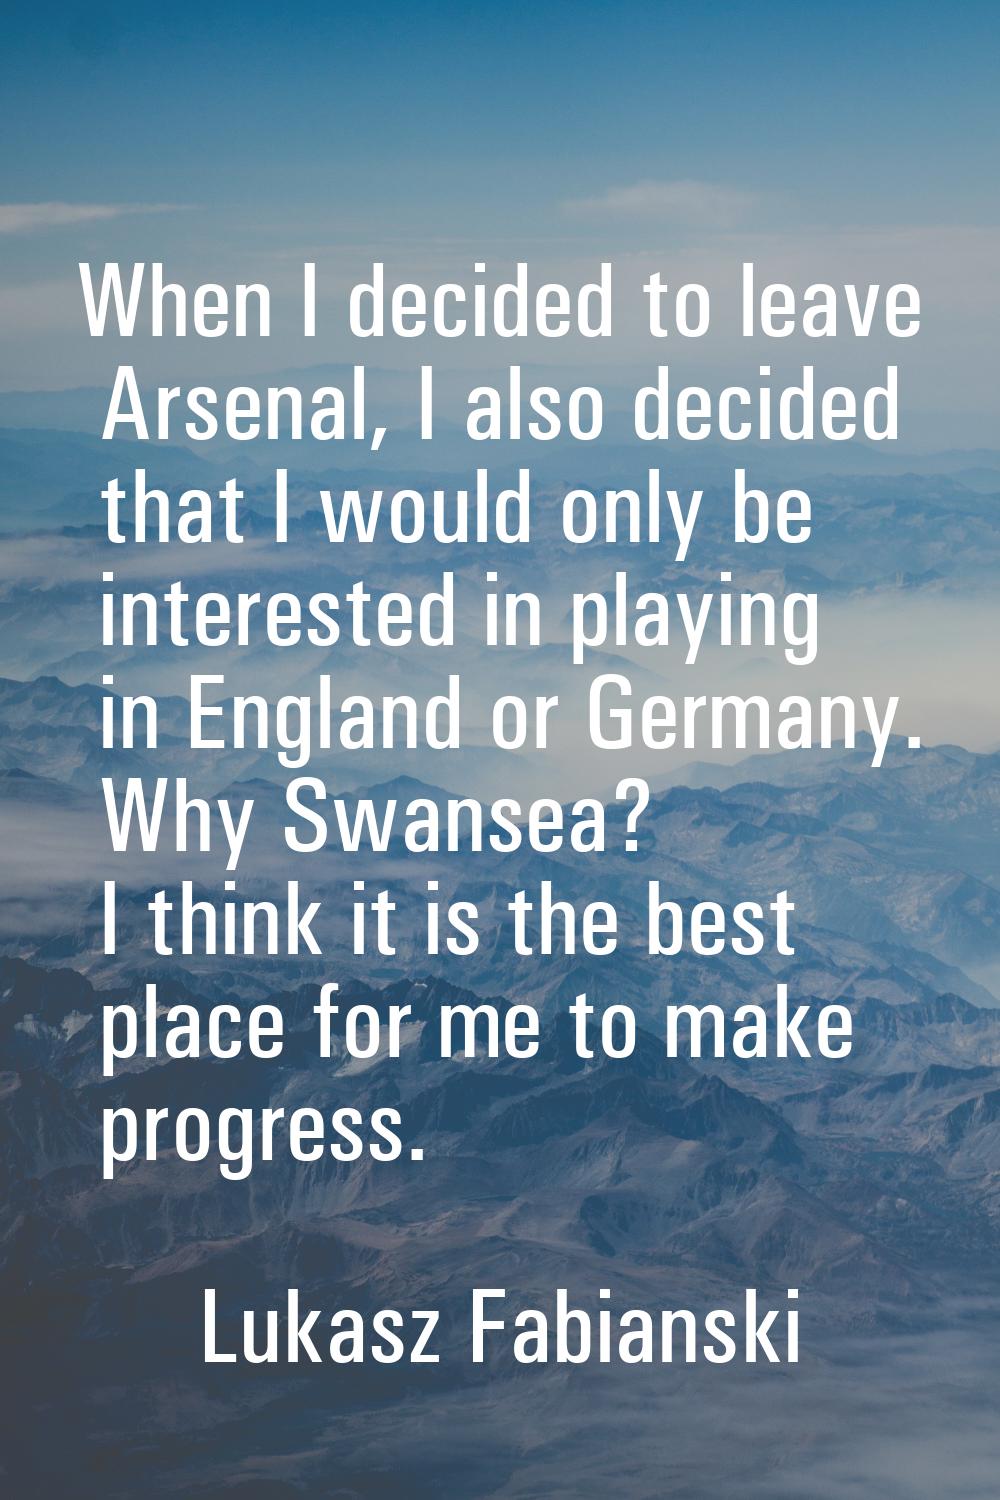 When I decided to leave Arsenal, I also decided that I would only be interested in playing in Engla